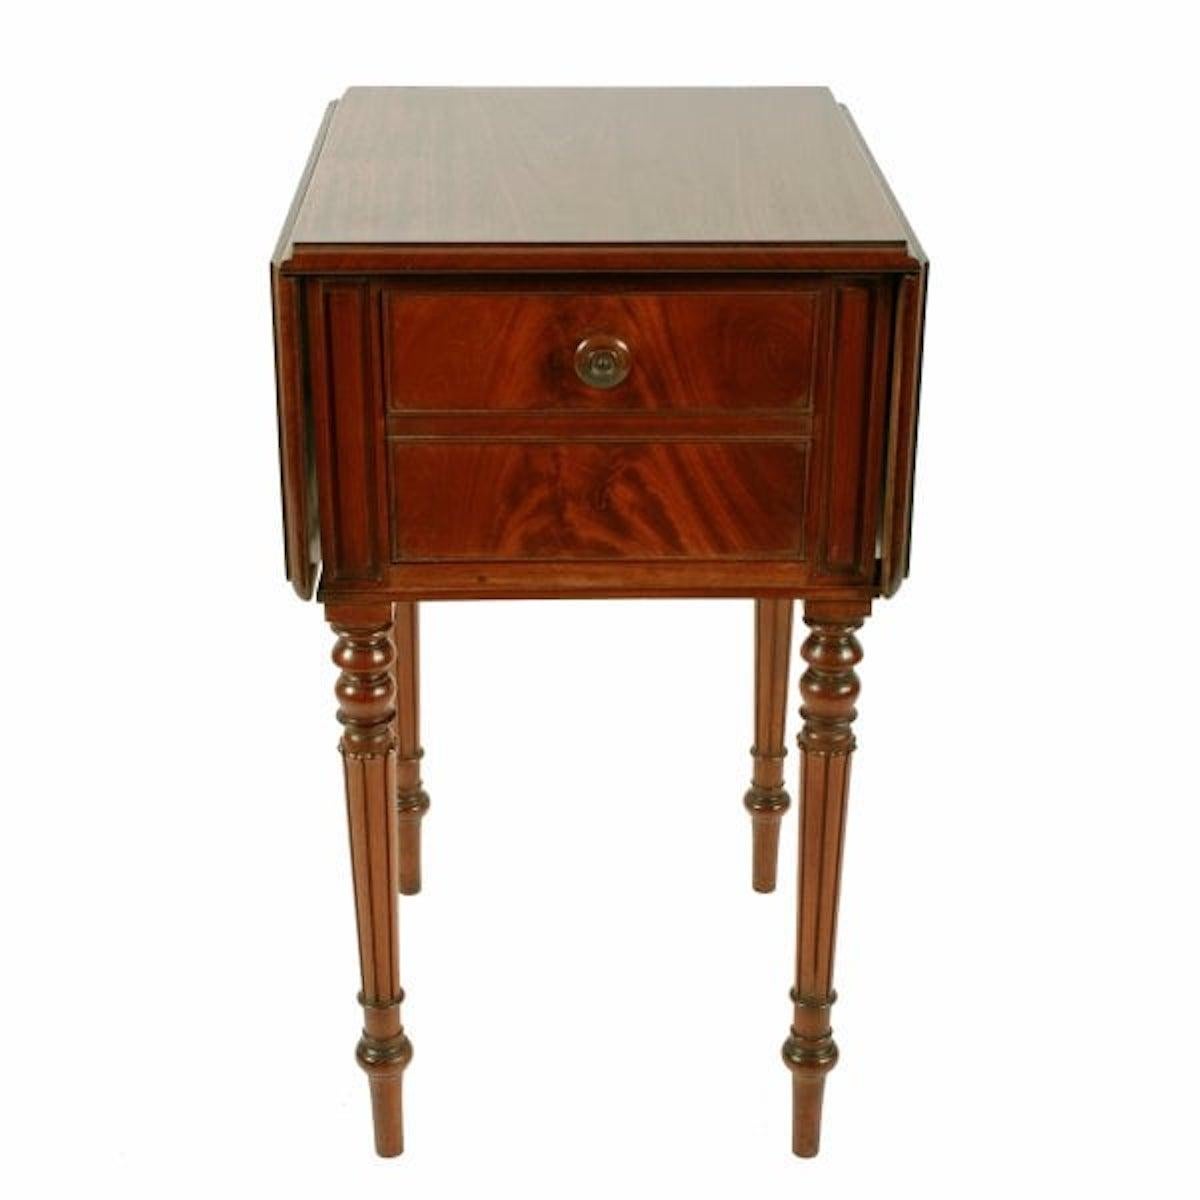 George IV Mahogany bedside cabinet

A George IV mahogany drop leaf bedside cabinet.

The cabinet has a mock drawer front that falls forward to open and has a knob handle with a twist catch.

The drop leaves are supported by a hinged flap when